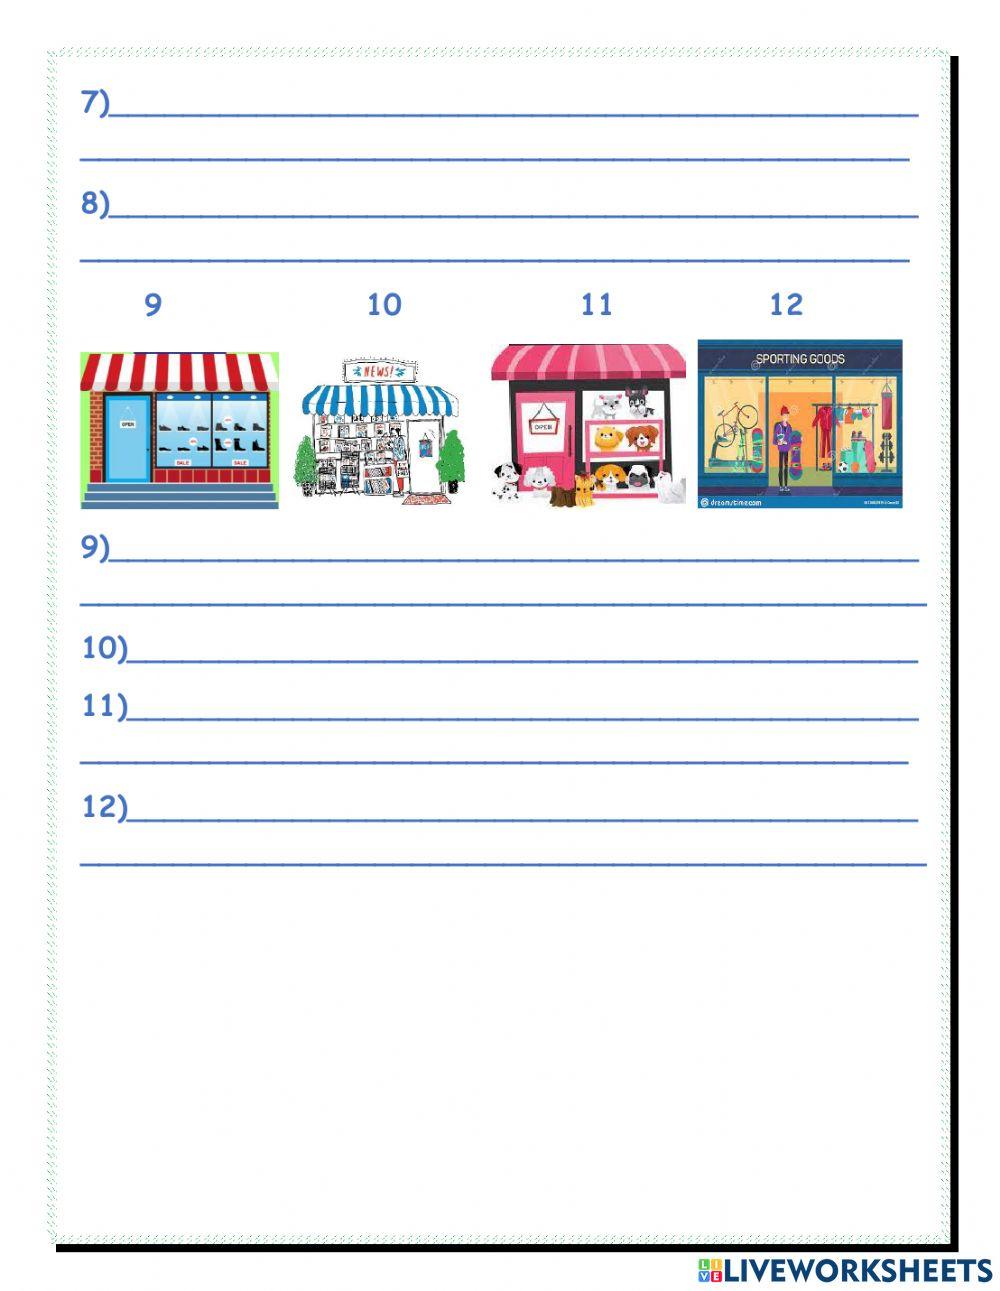 Types of shops, Shopping